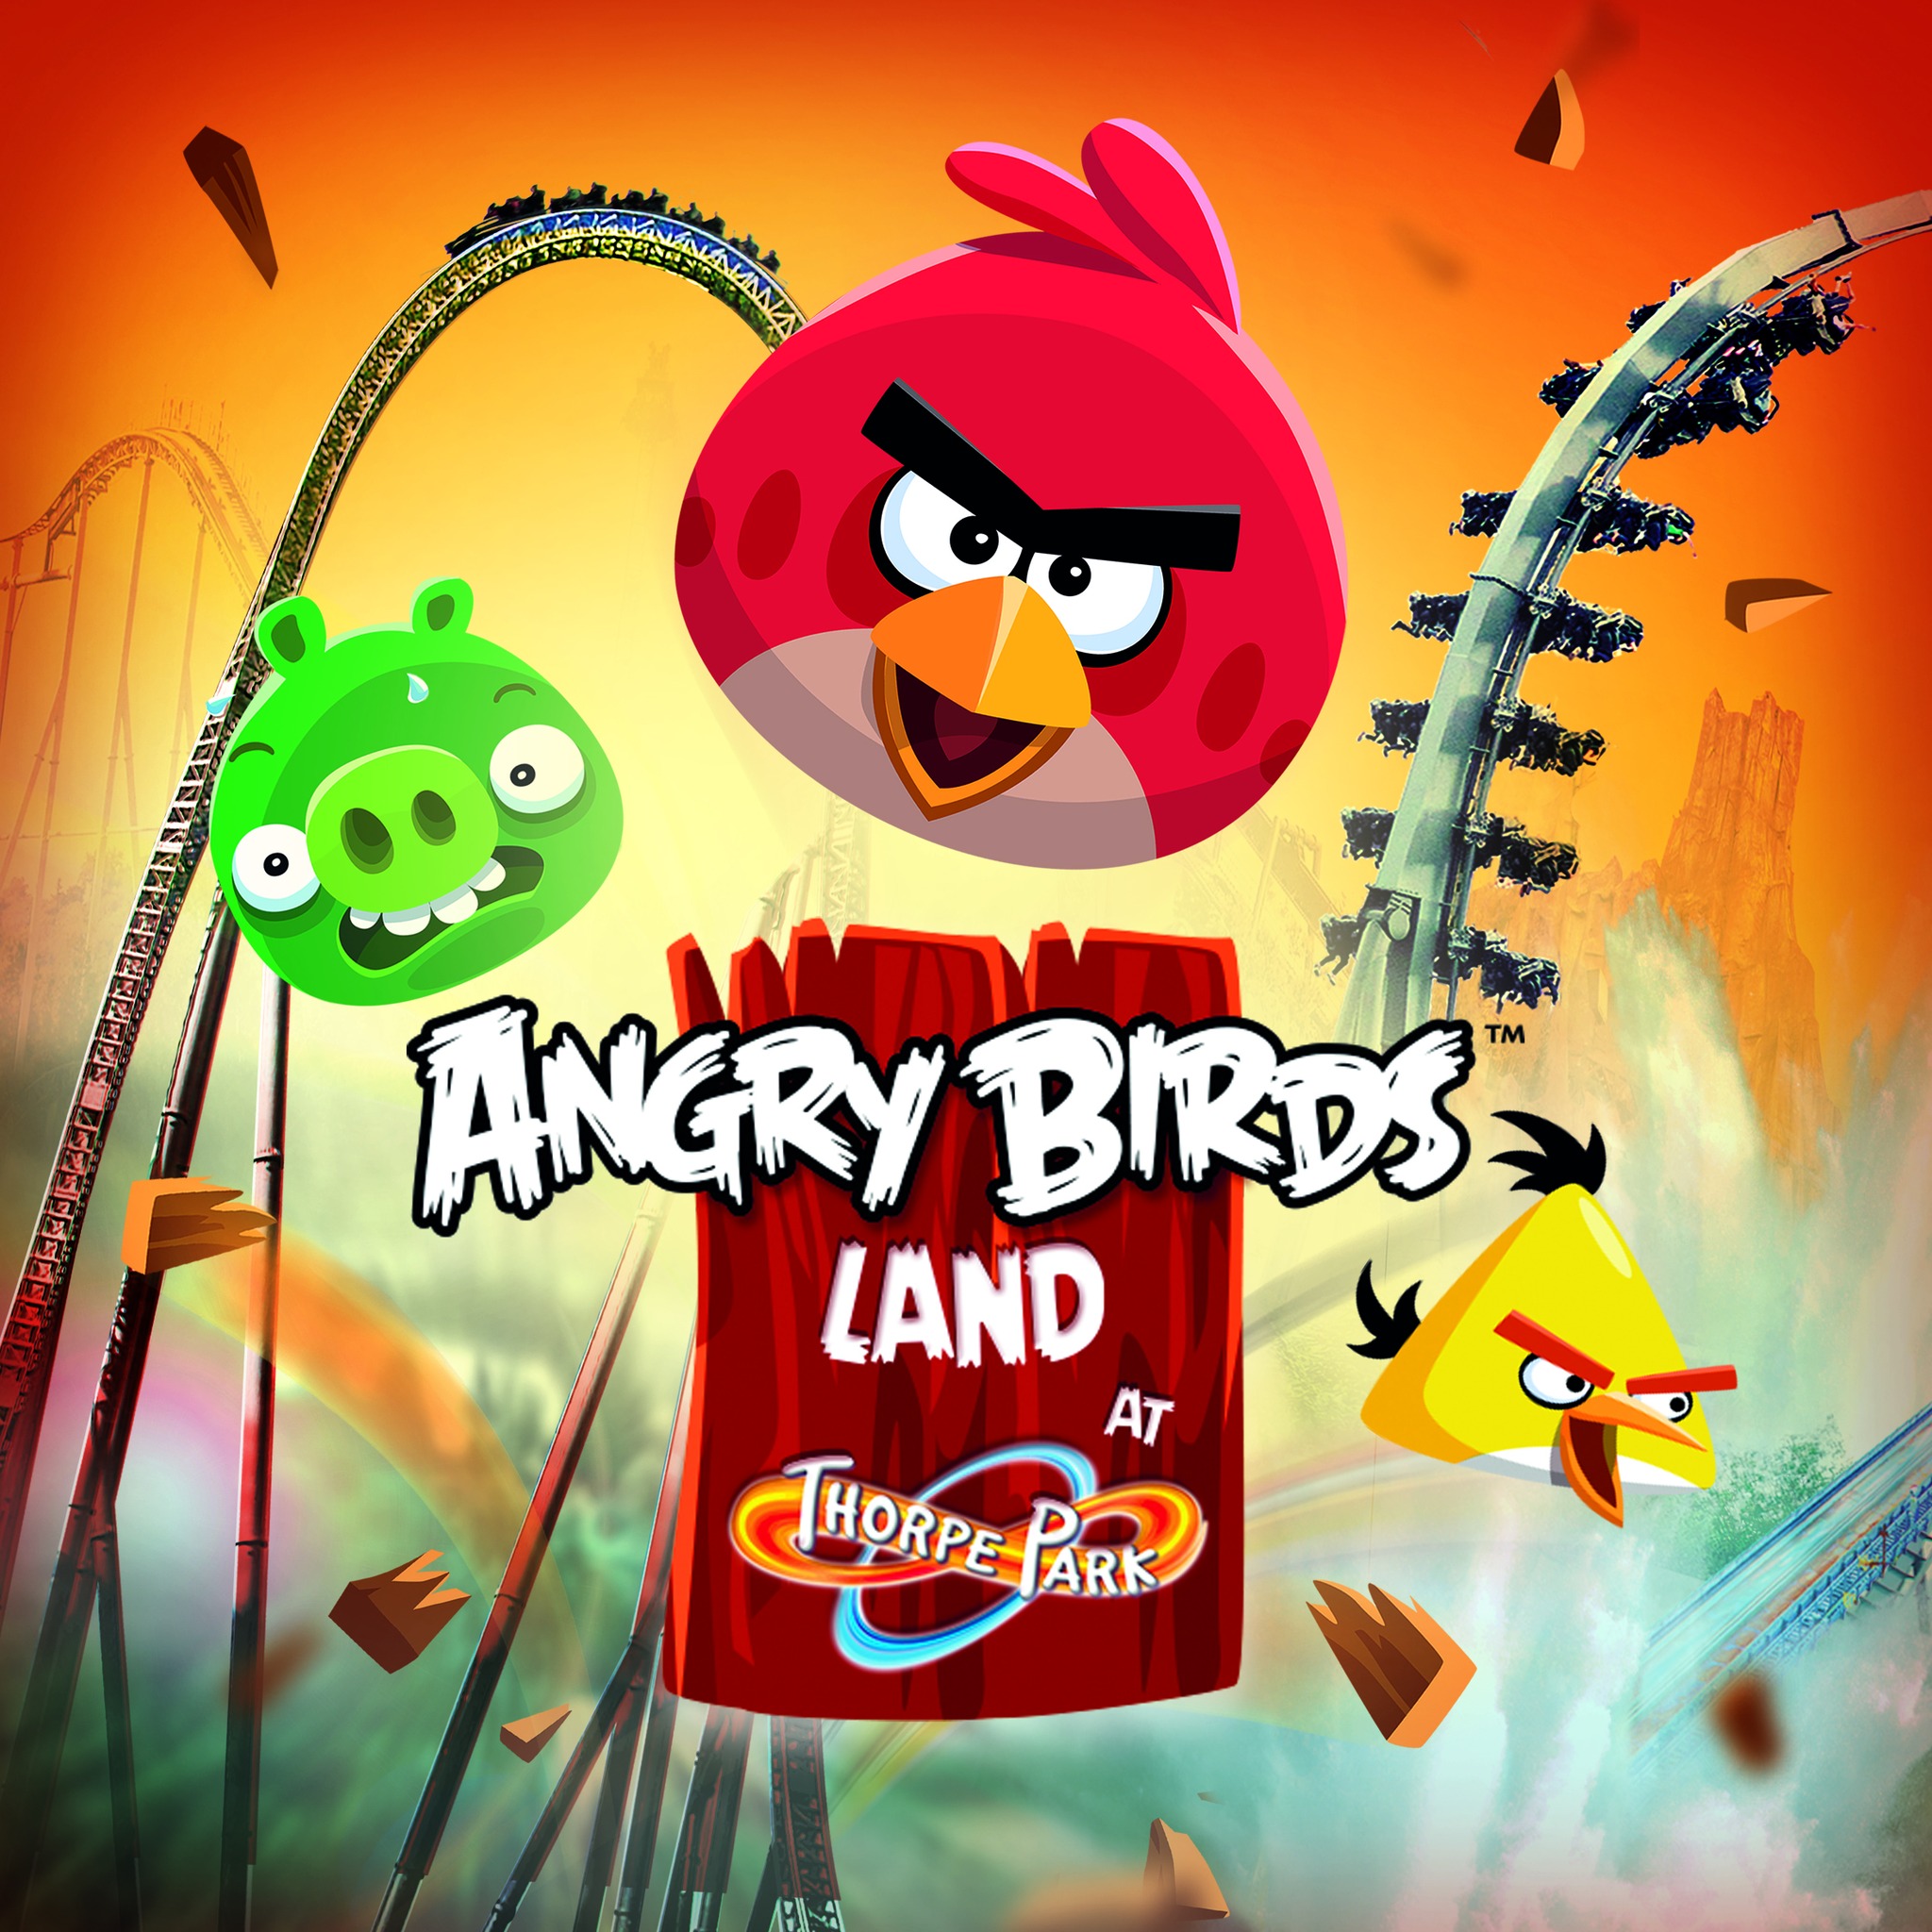 Thorpe Park Announce Closure Of Angry Birds Land